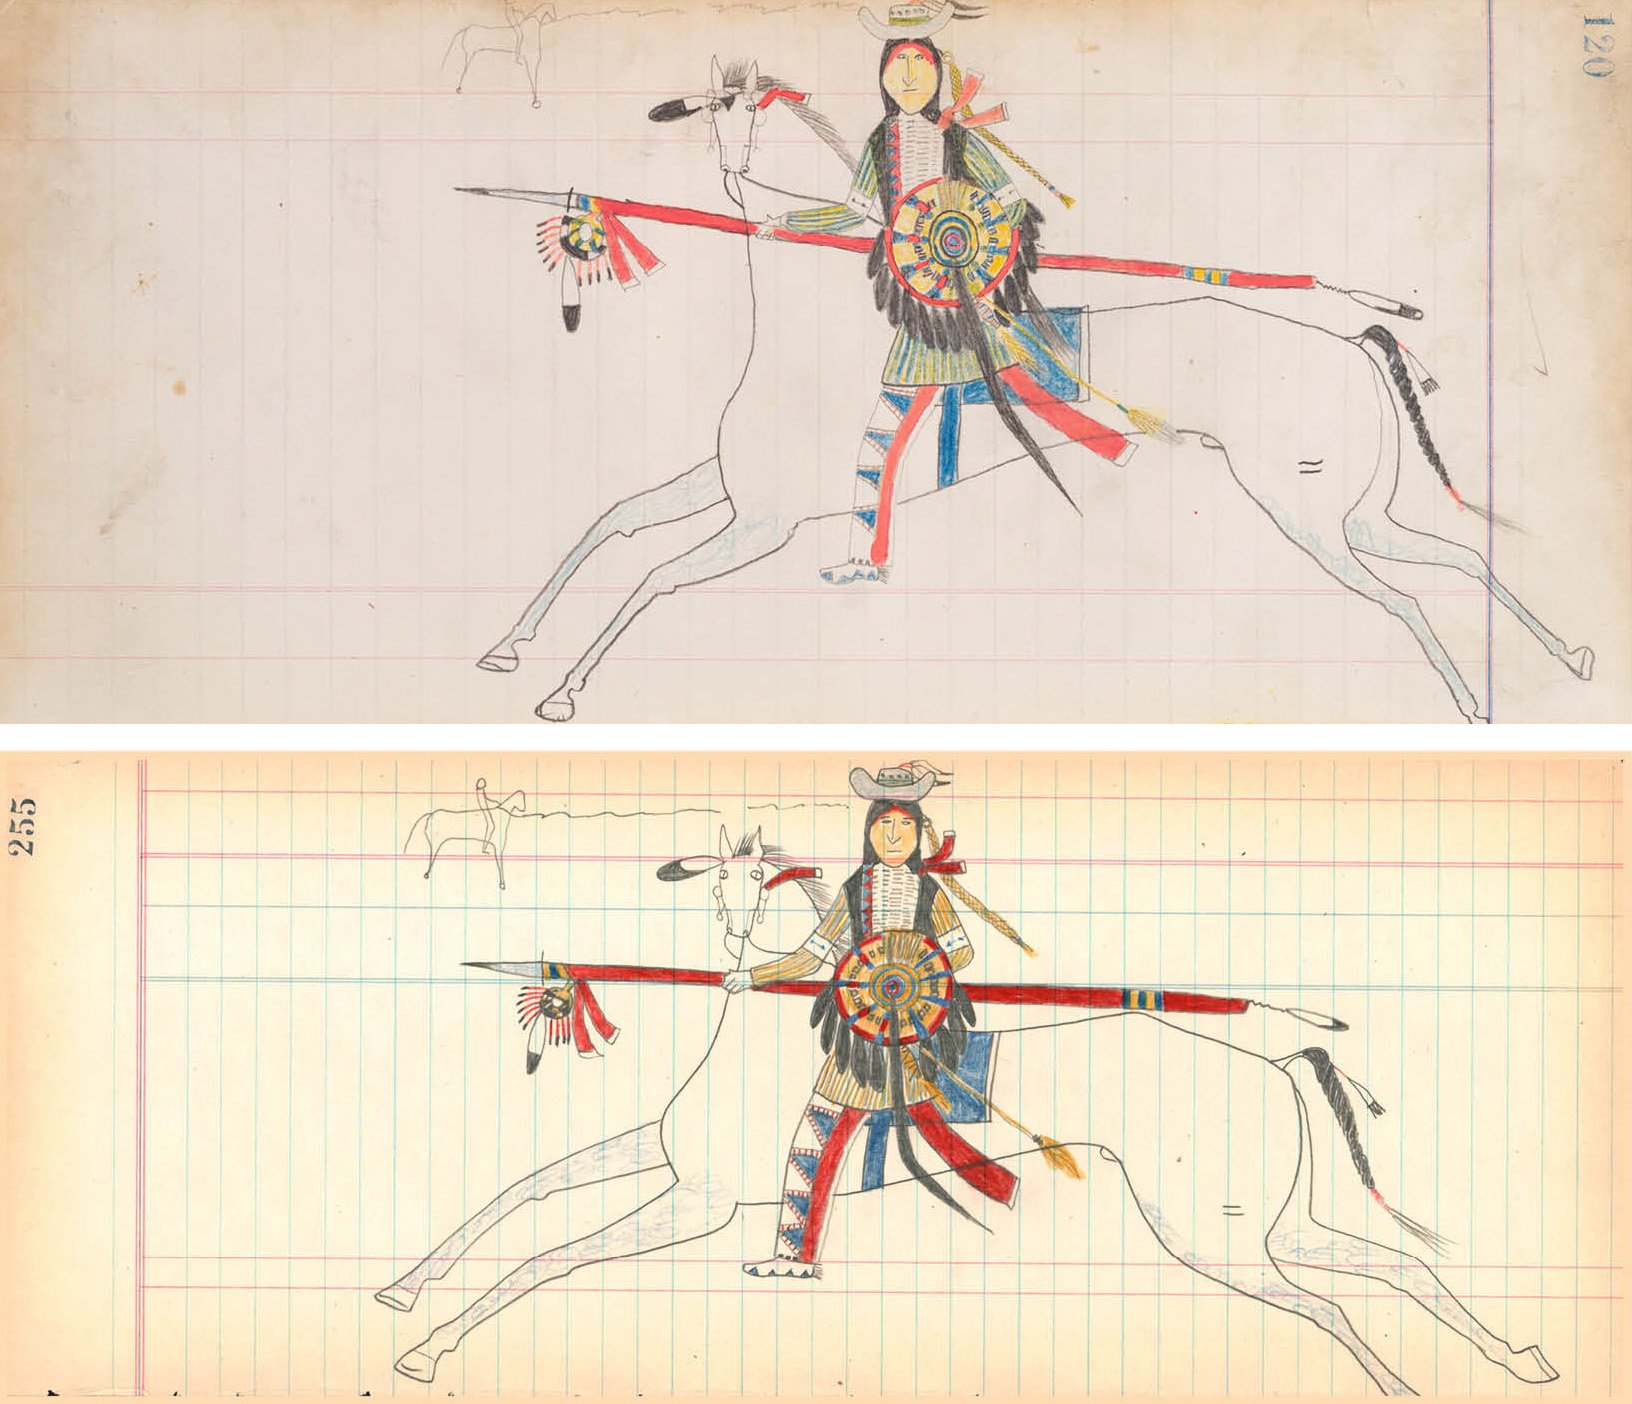 Attributed to Southern Arapaho artist Frank Henderson, "Self-portrait" is housed at the Metropolitan Museum of Art in New York and was created around 1880. "Arapaho Dog Soldier" is currently housed at the Pioneer Museum and not attributed to any artist, but is touted as authentic ledger art.